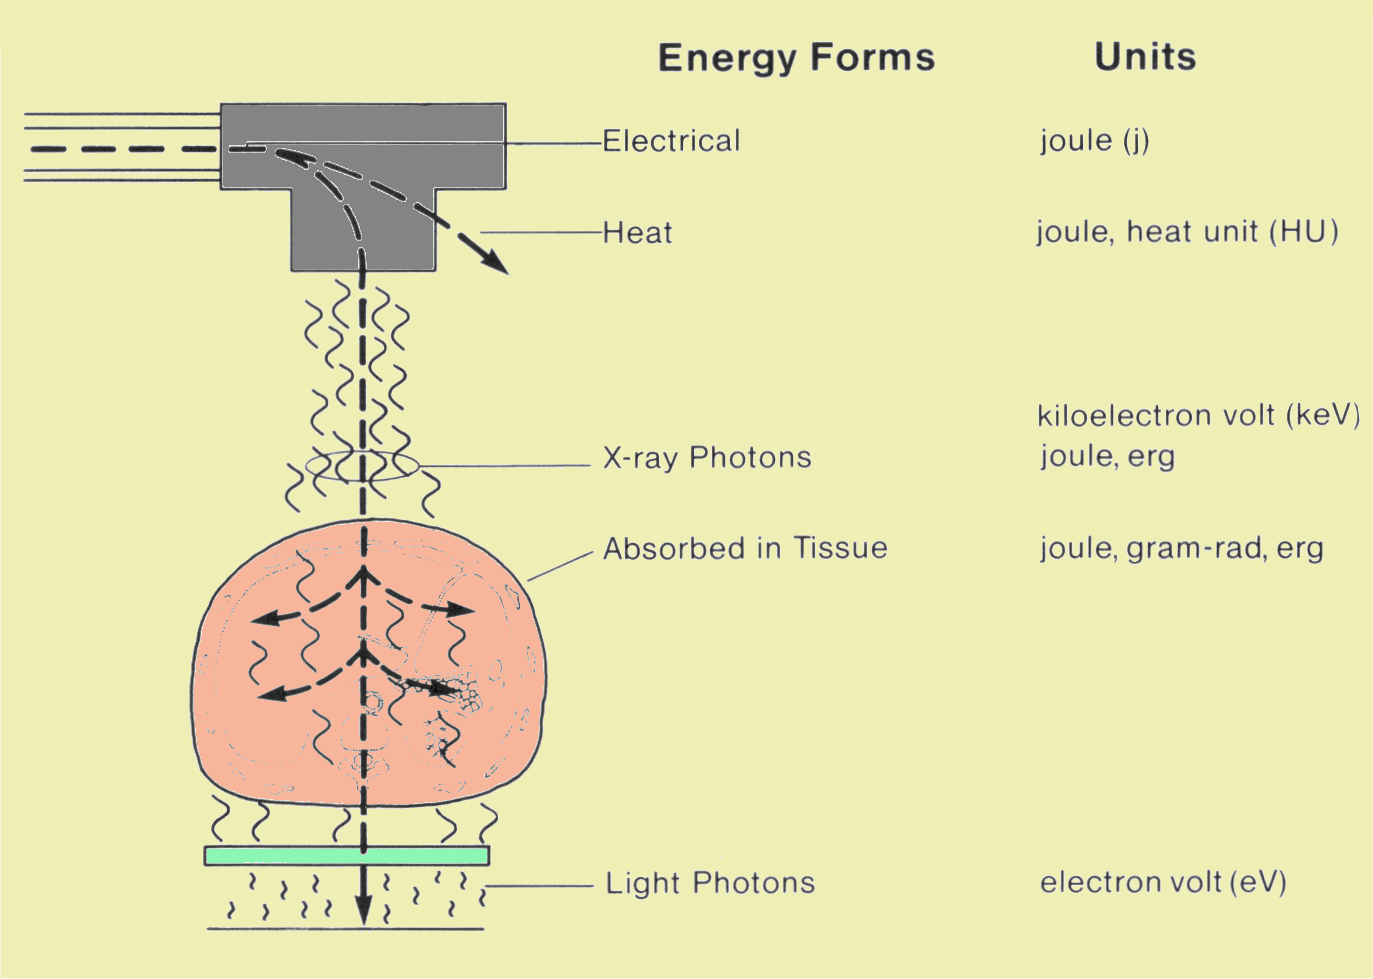 Energy Units Encountered in X-Ray Imaging